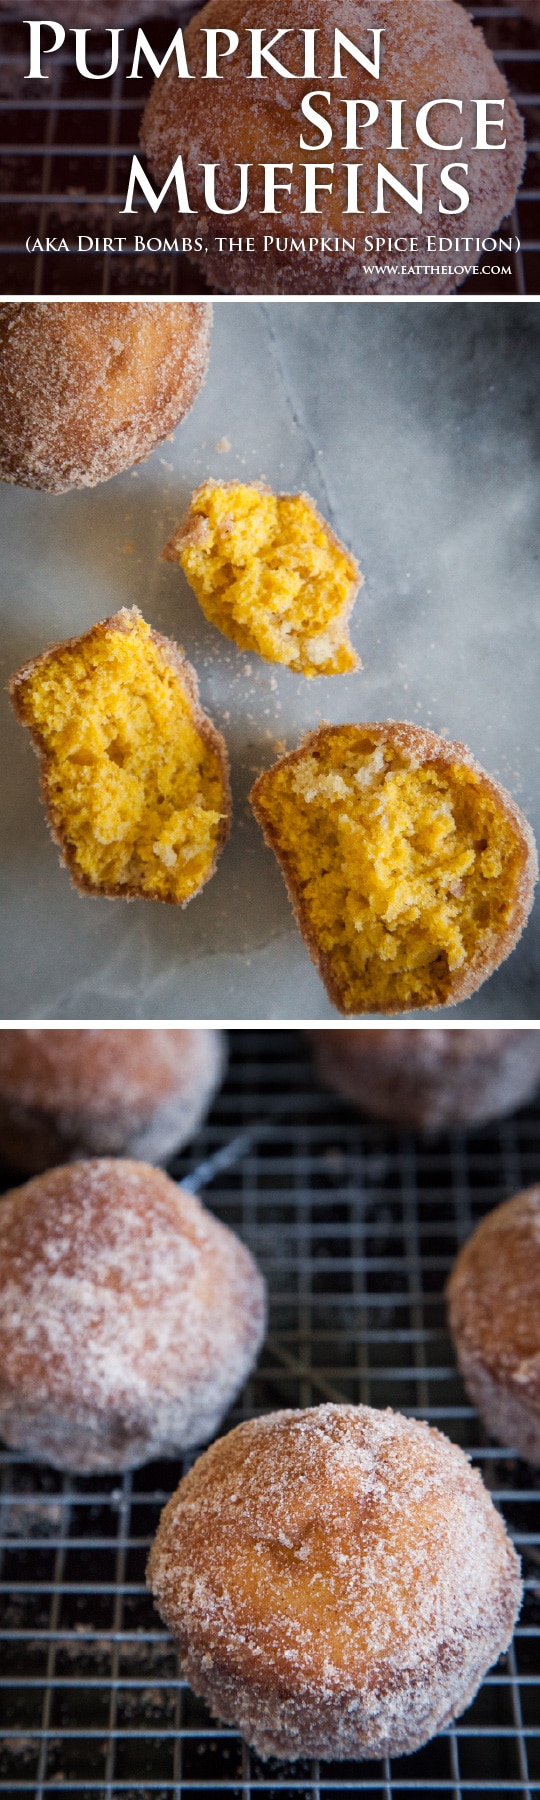 Pumpkin Spice Muffins, otherwise known as the Pumpkin Spice Dirt Bomb! Photo and recipe by Irvin Lin of Eat the Love.